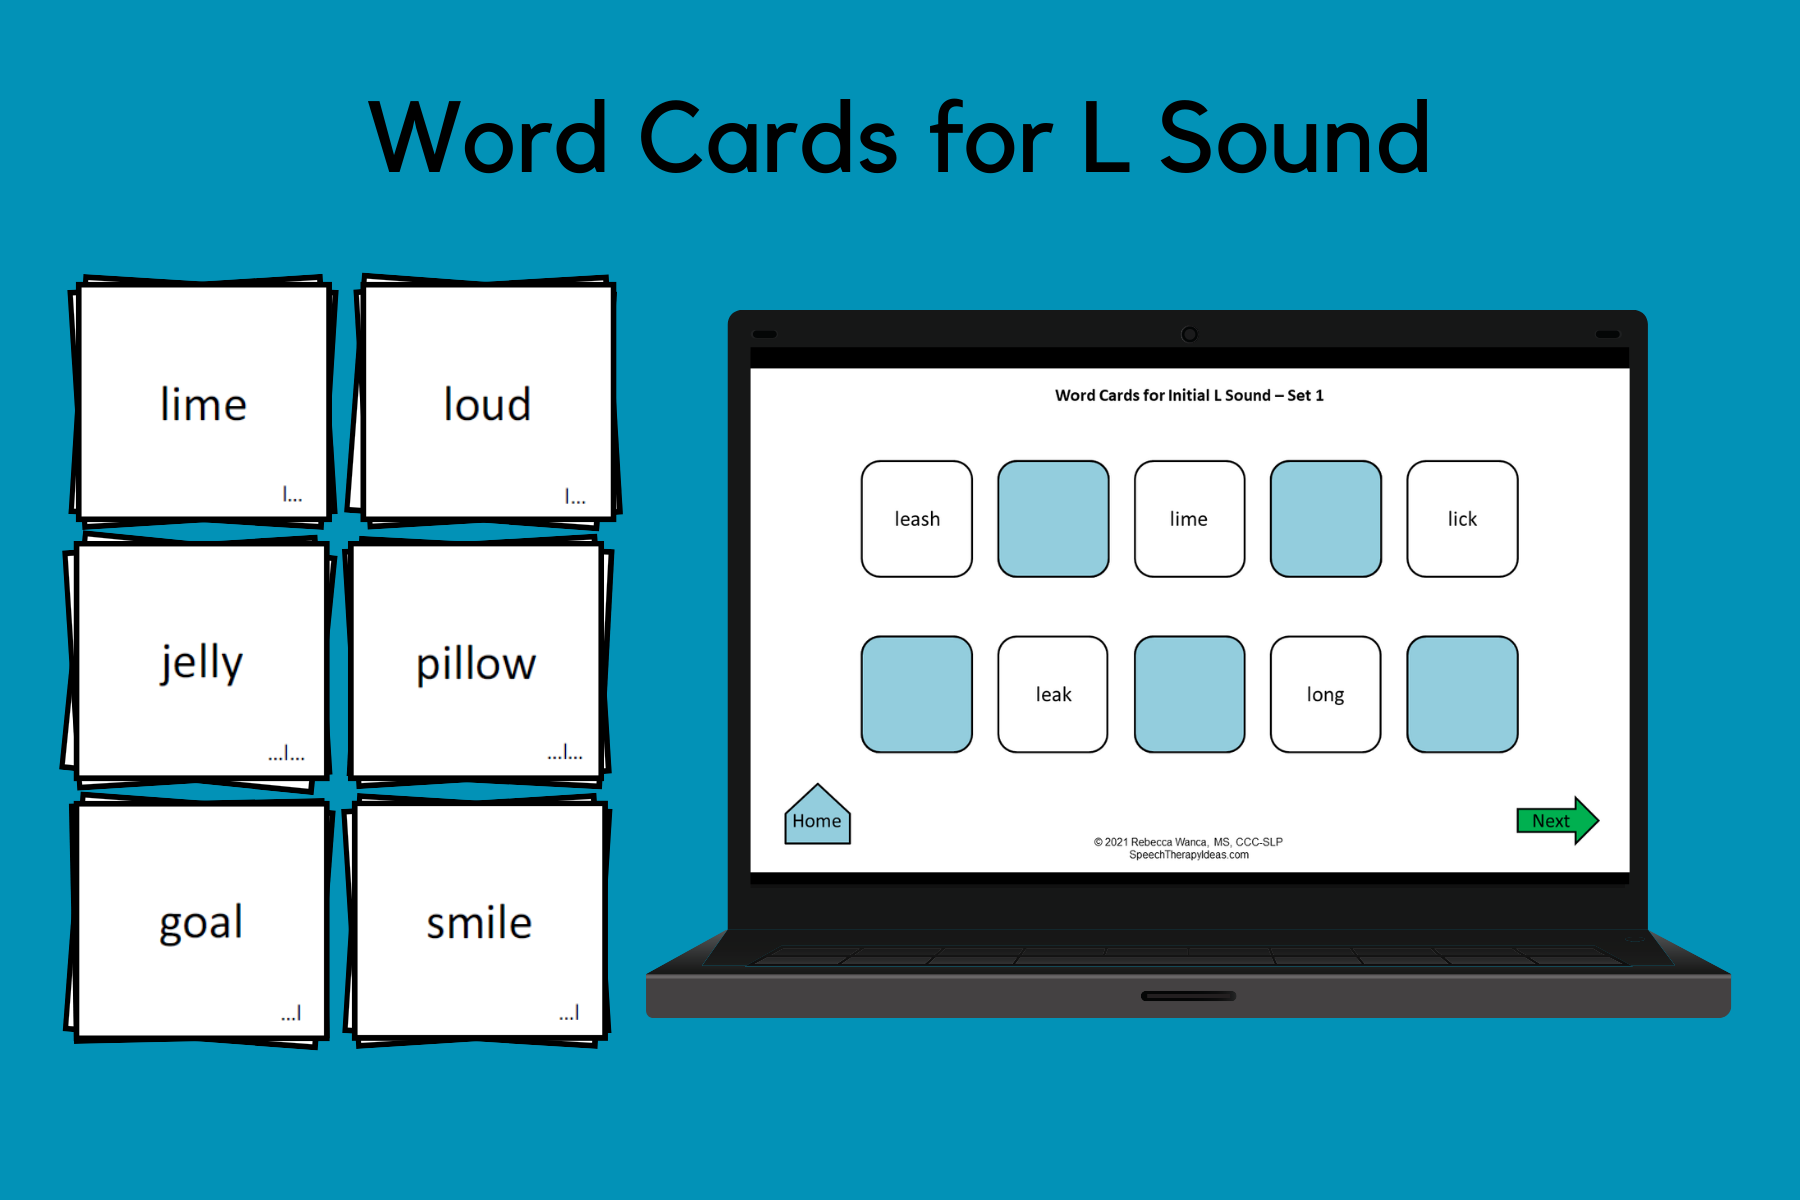 Word Cards for L Sound